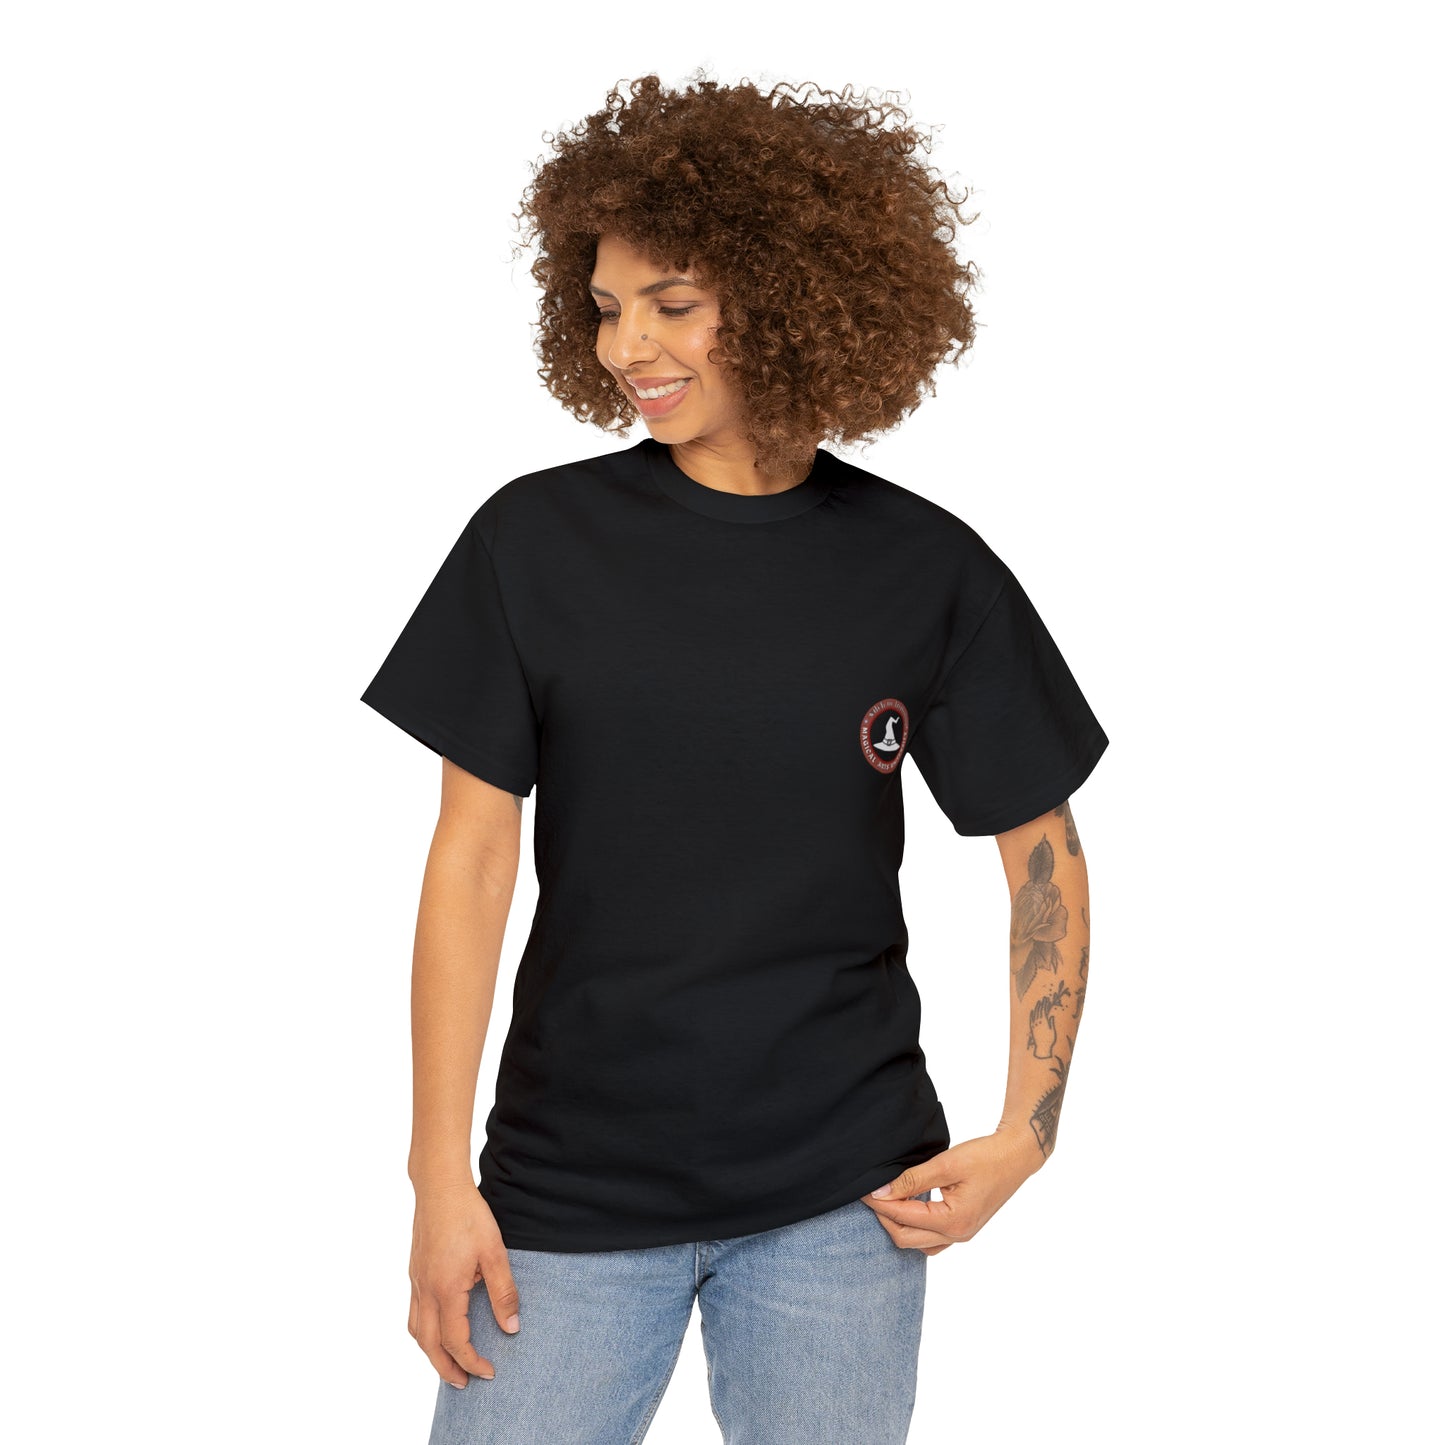 Witch in Training printed badge front/ Emblem back Unisex Heavy Cotton Tee